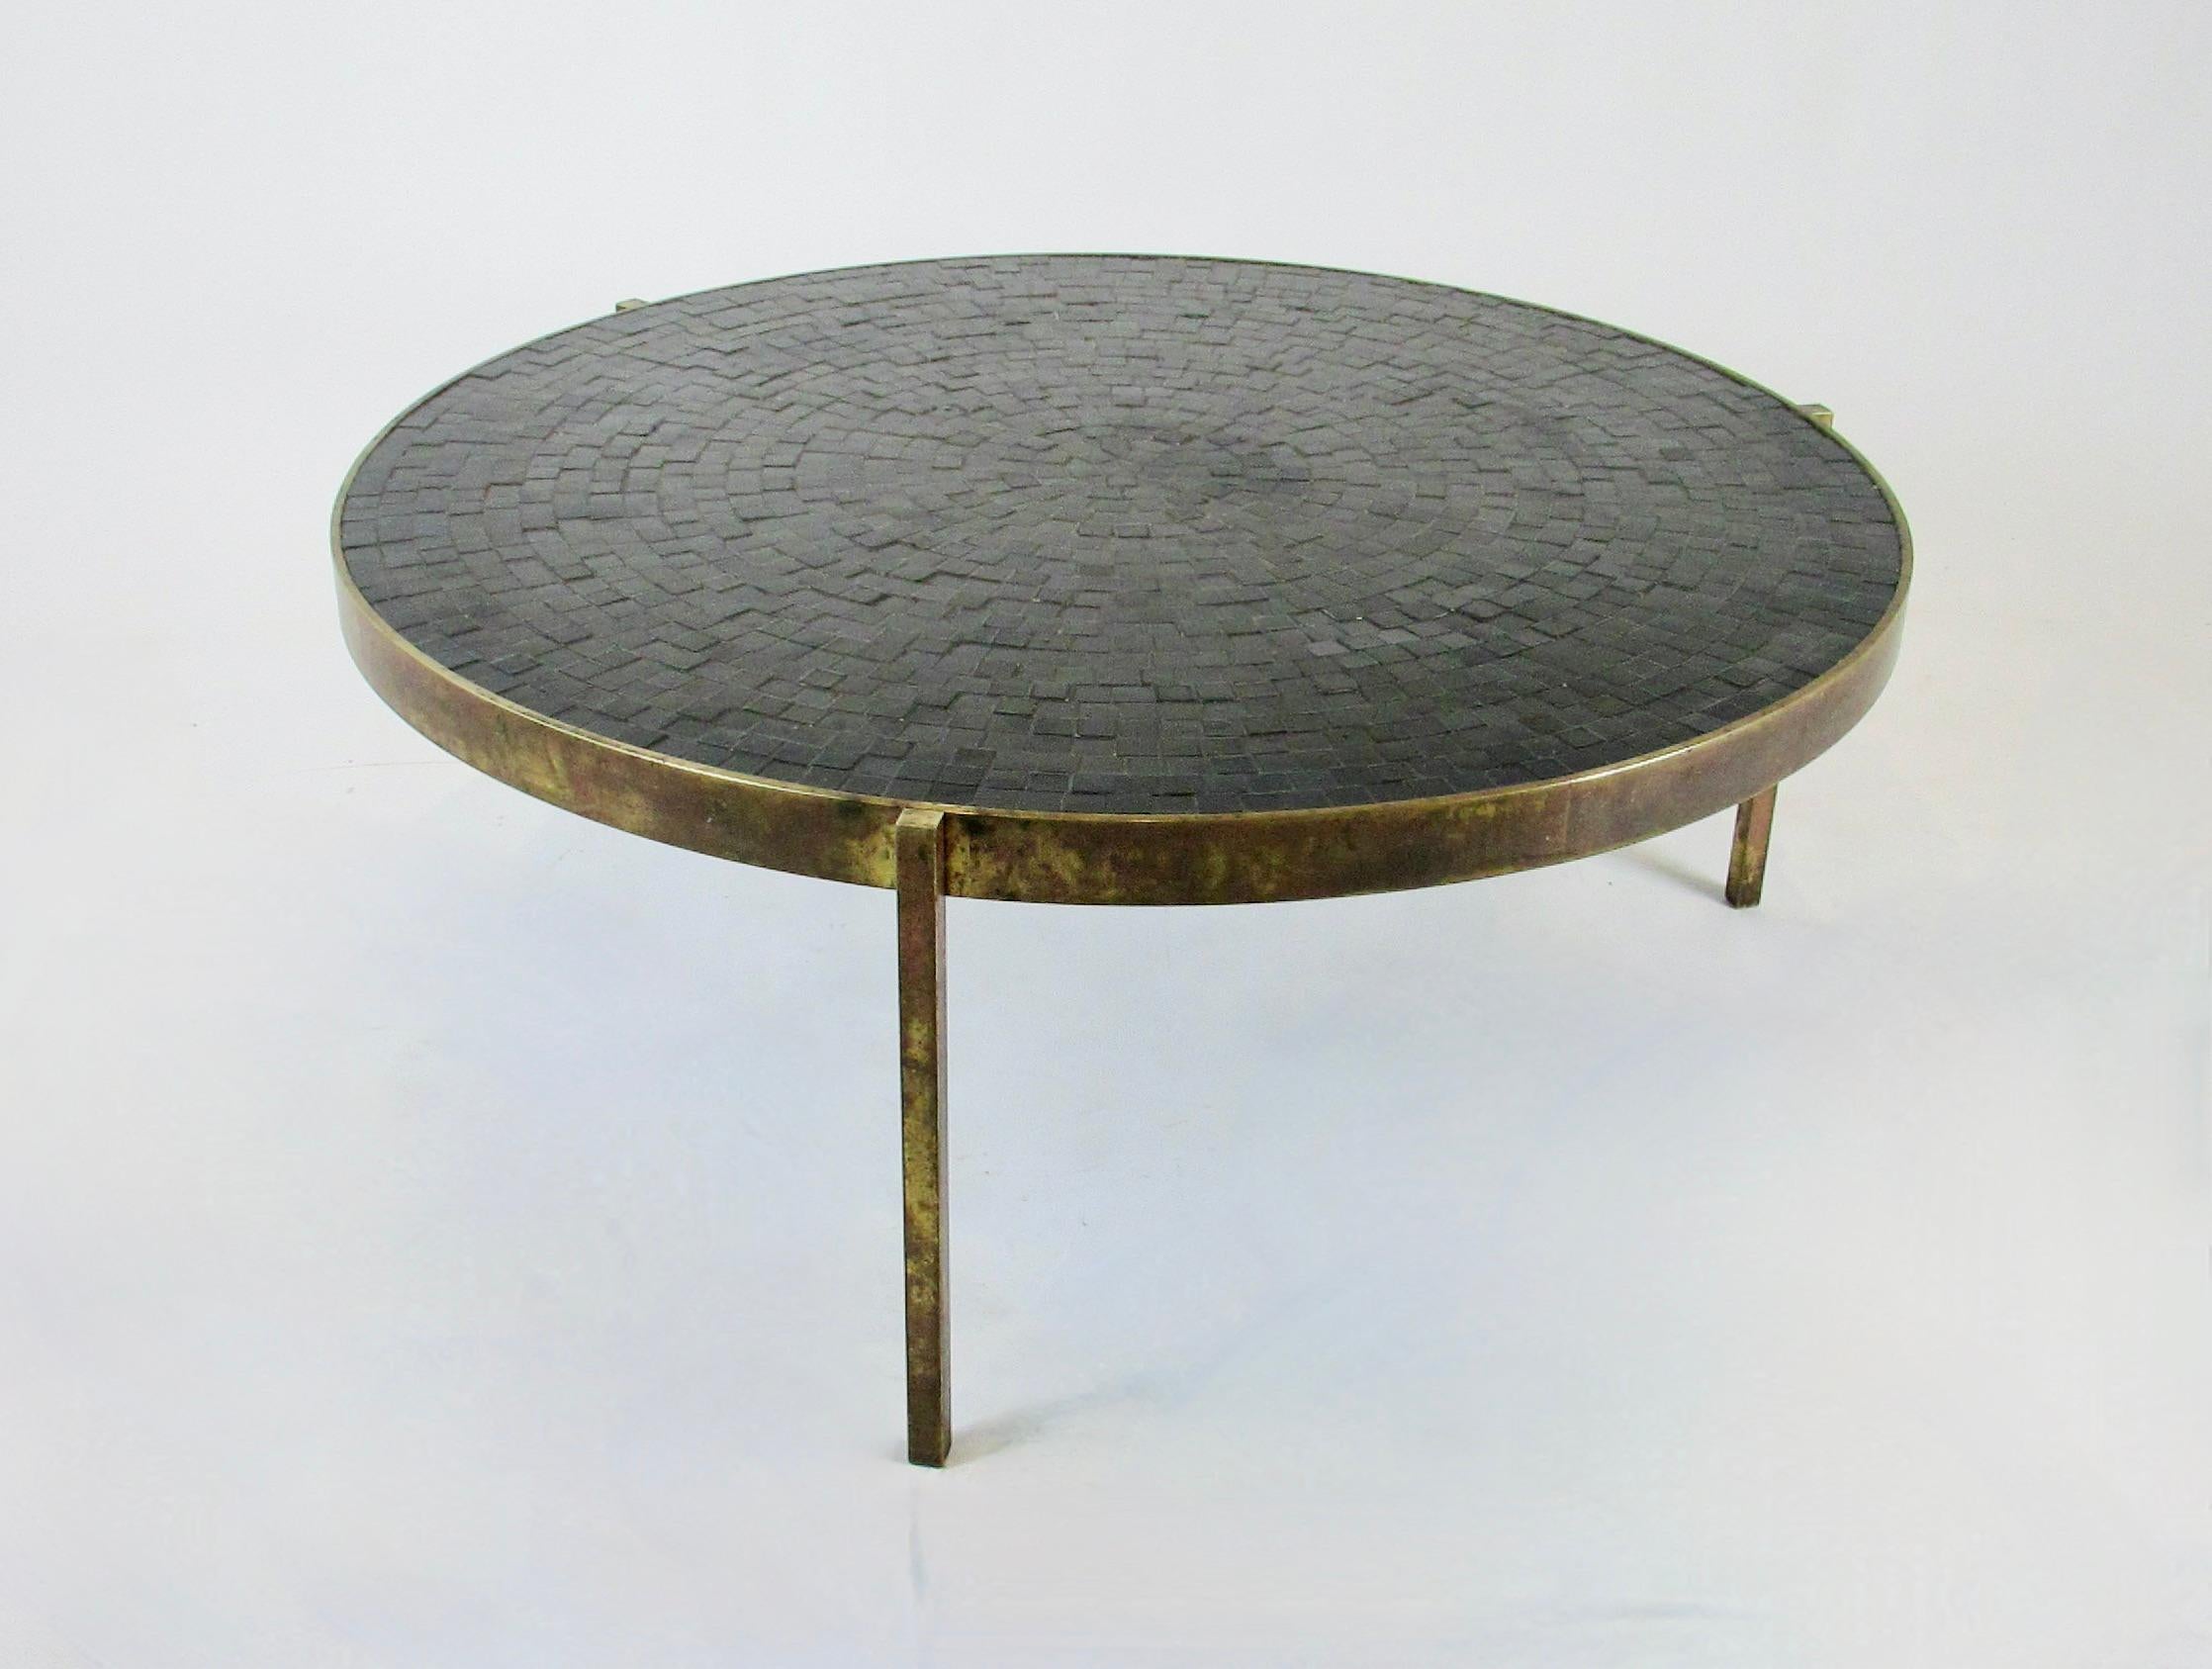 Hand-Crafted Round Top Bronze Base Cocktail Table with Concentric Design Black Tiles For Sale